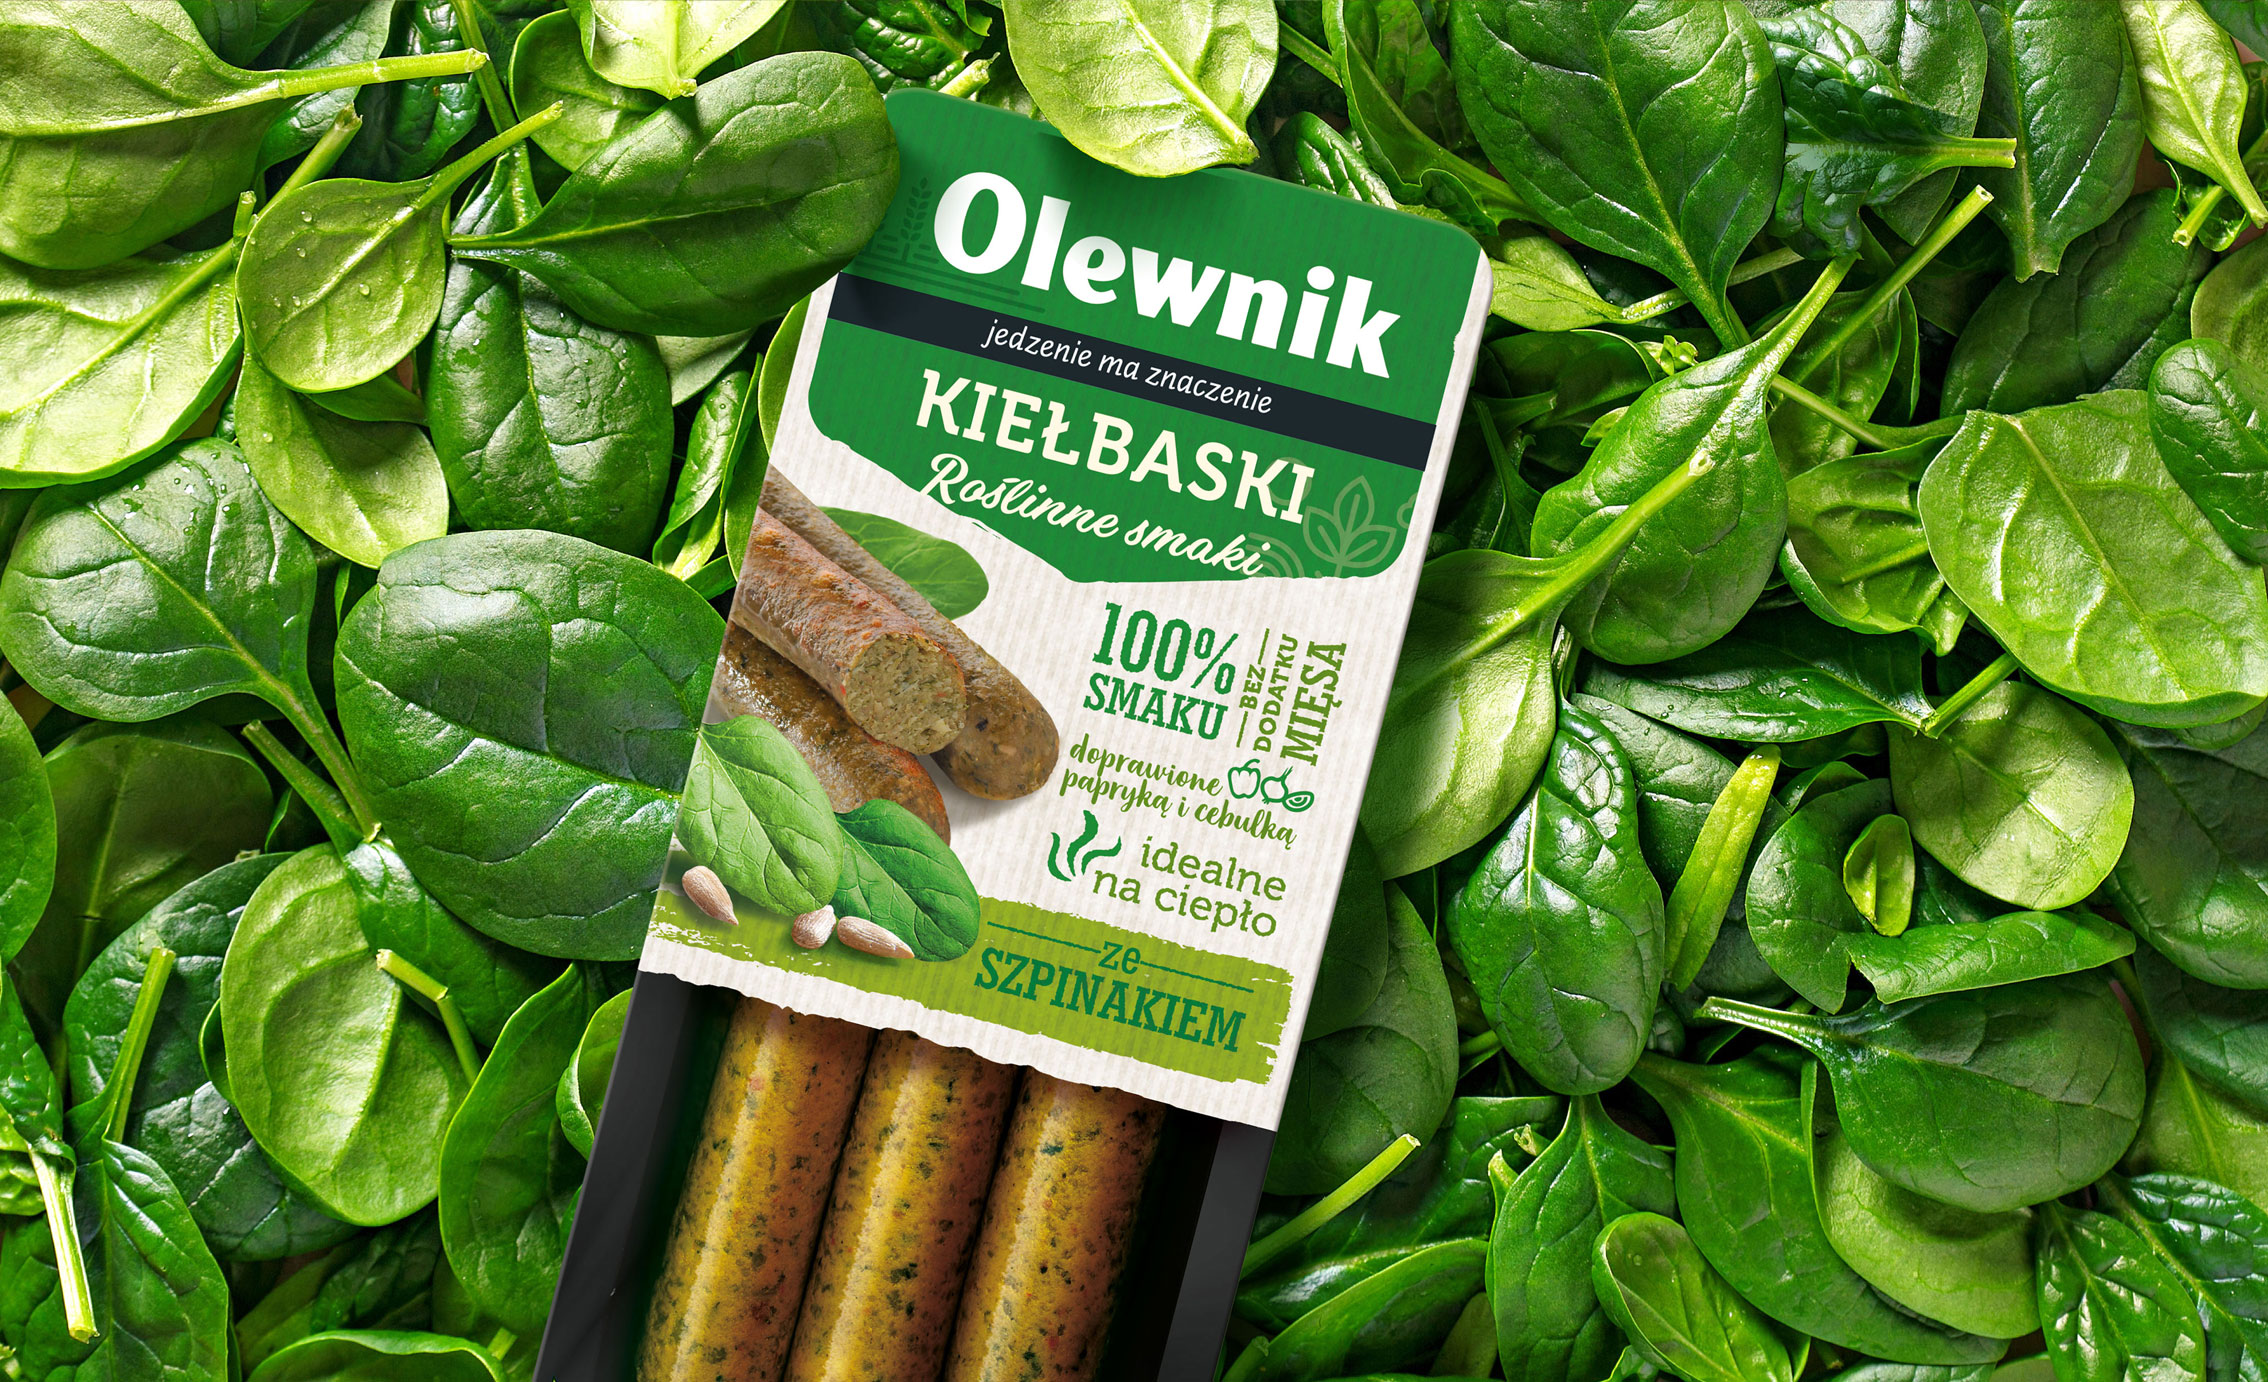 Vegetable product Olewnik - spinach sausages